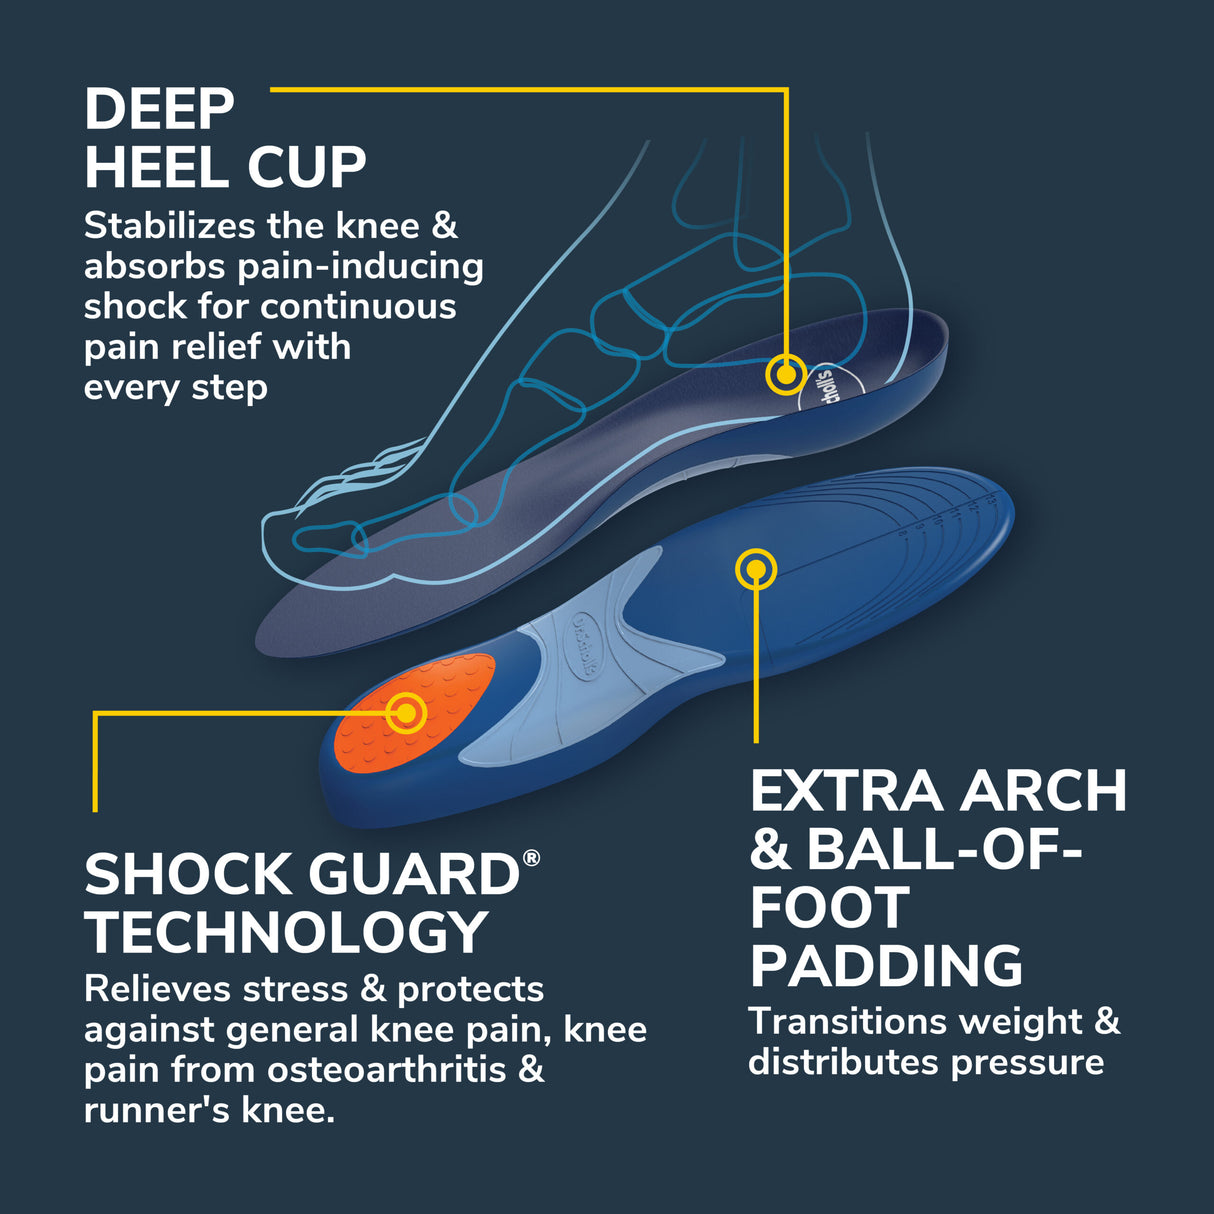 image of deep heel cup shock guard technology and extra arch ball of foot padding